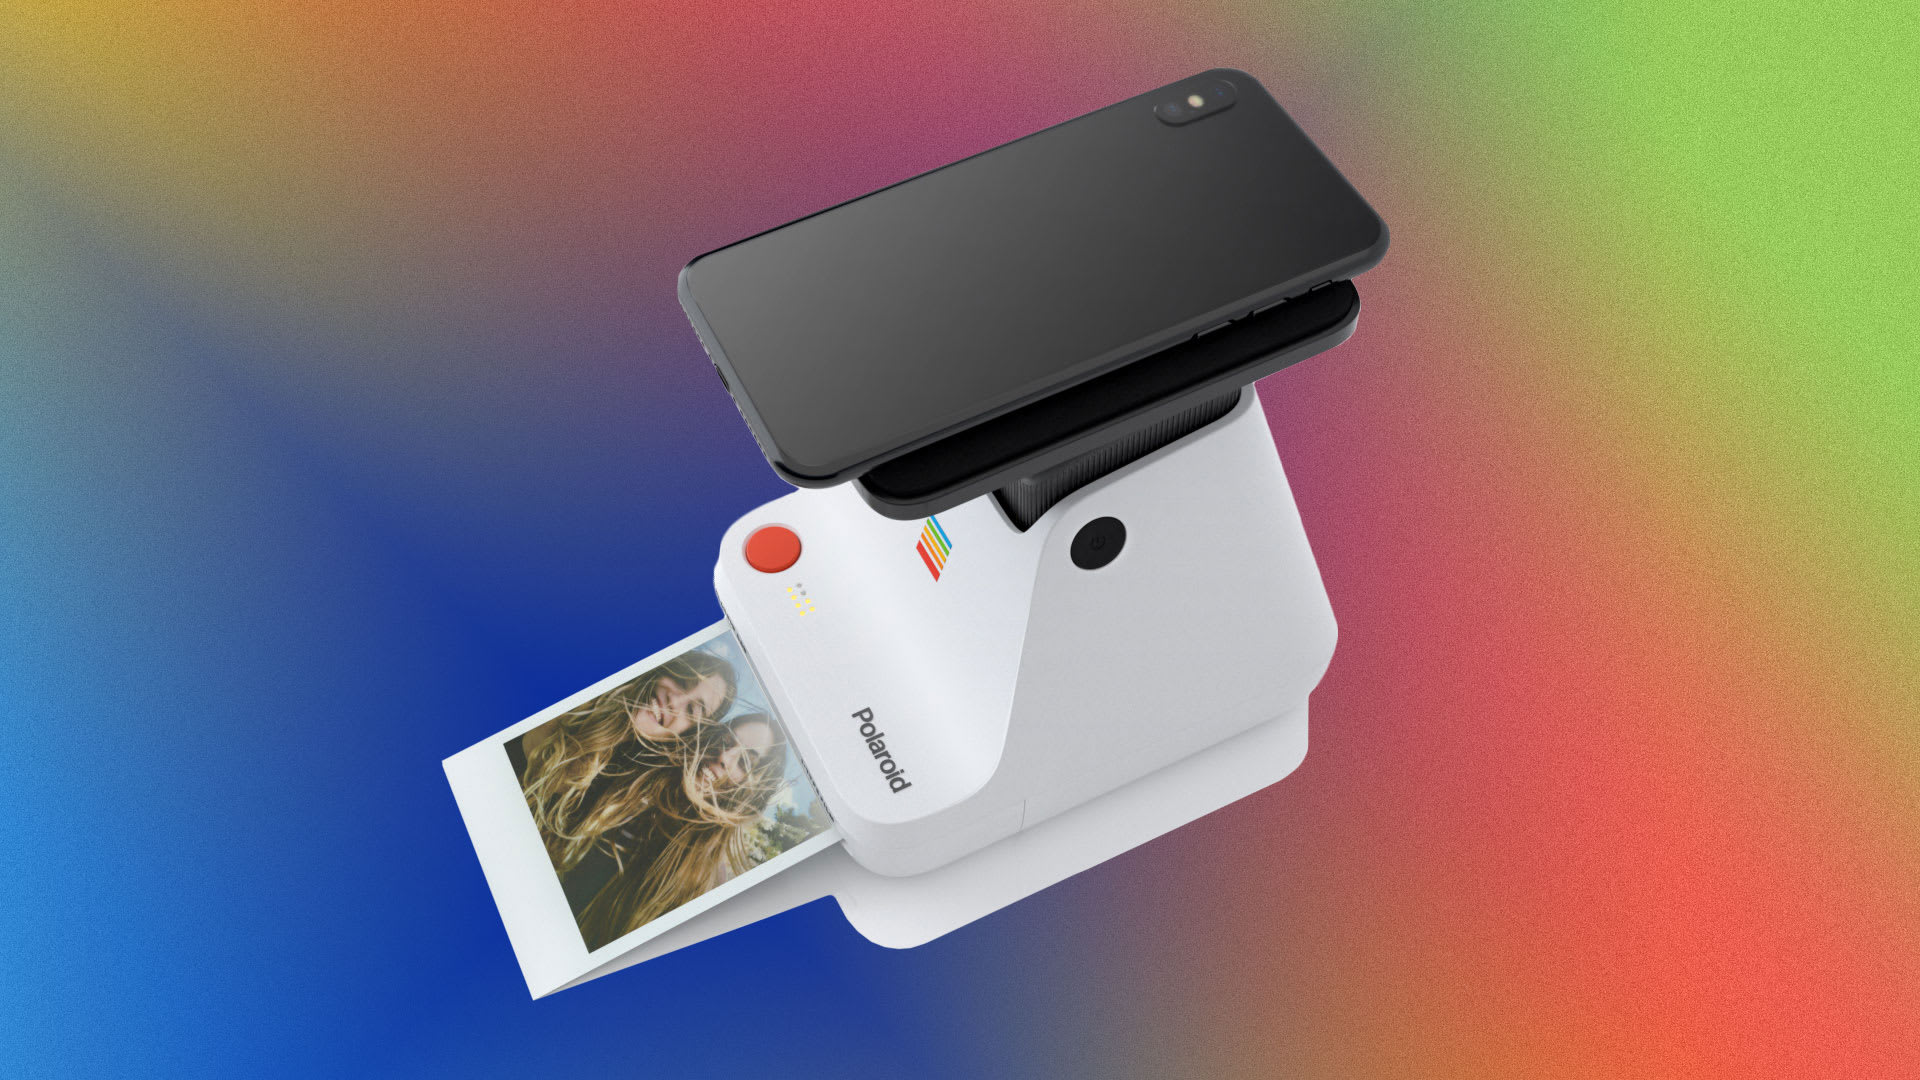 Polaroid’s newest gadget gives analog life to smartphone photos